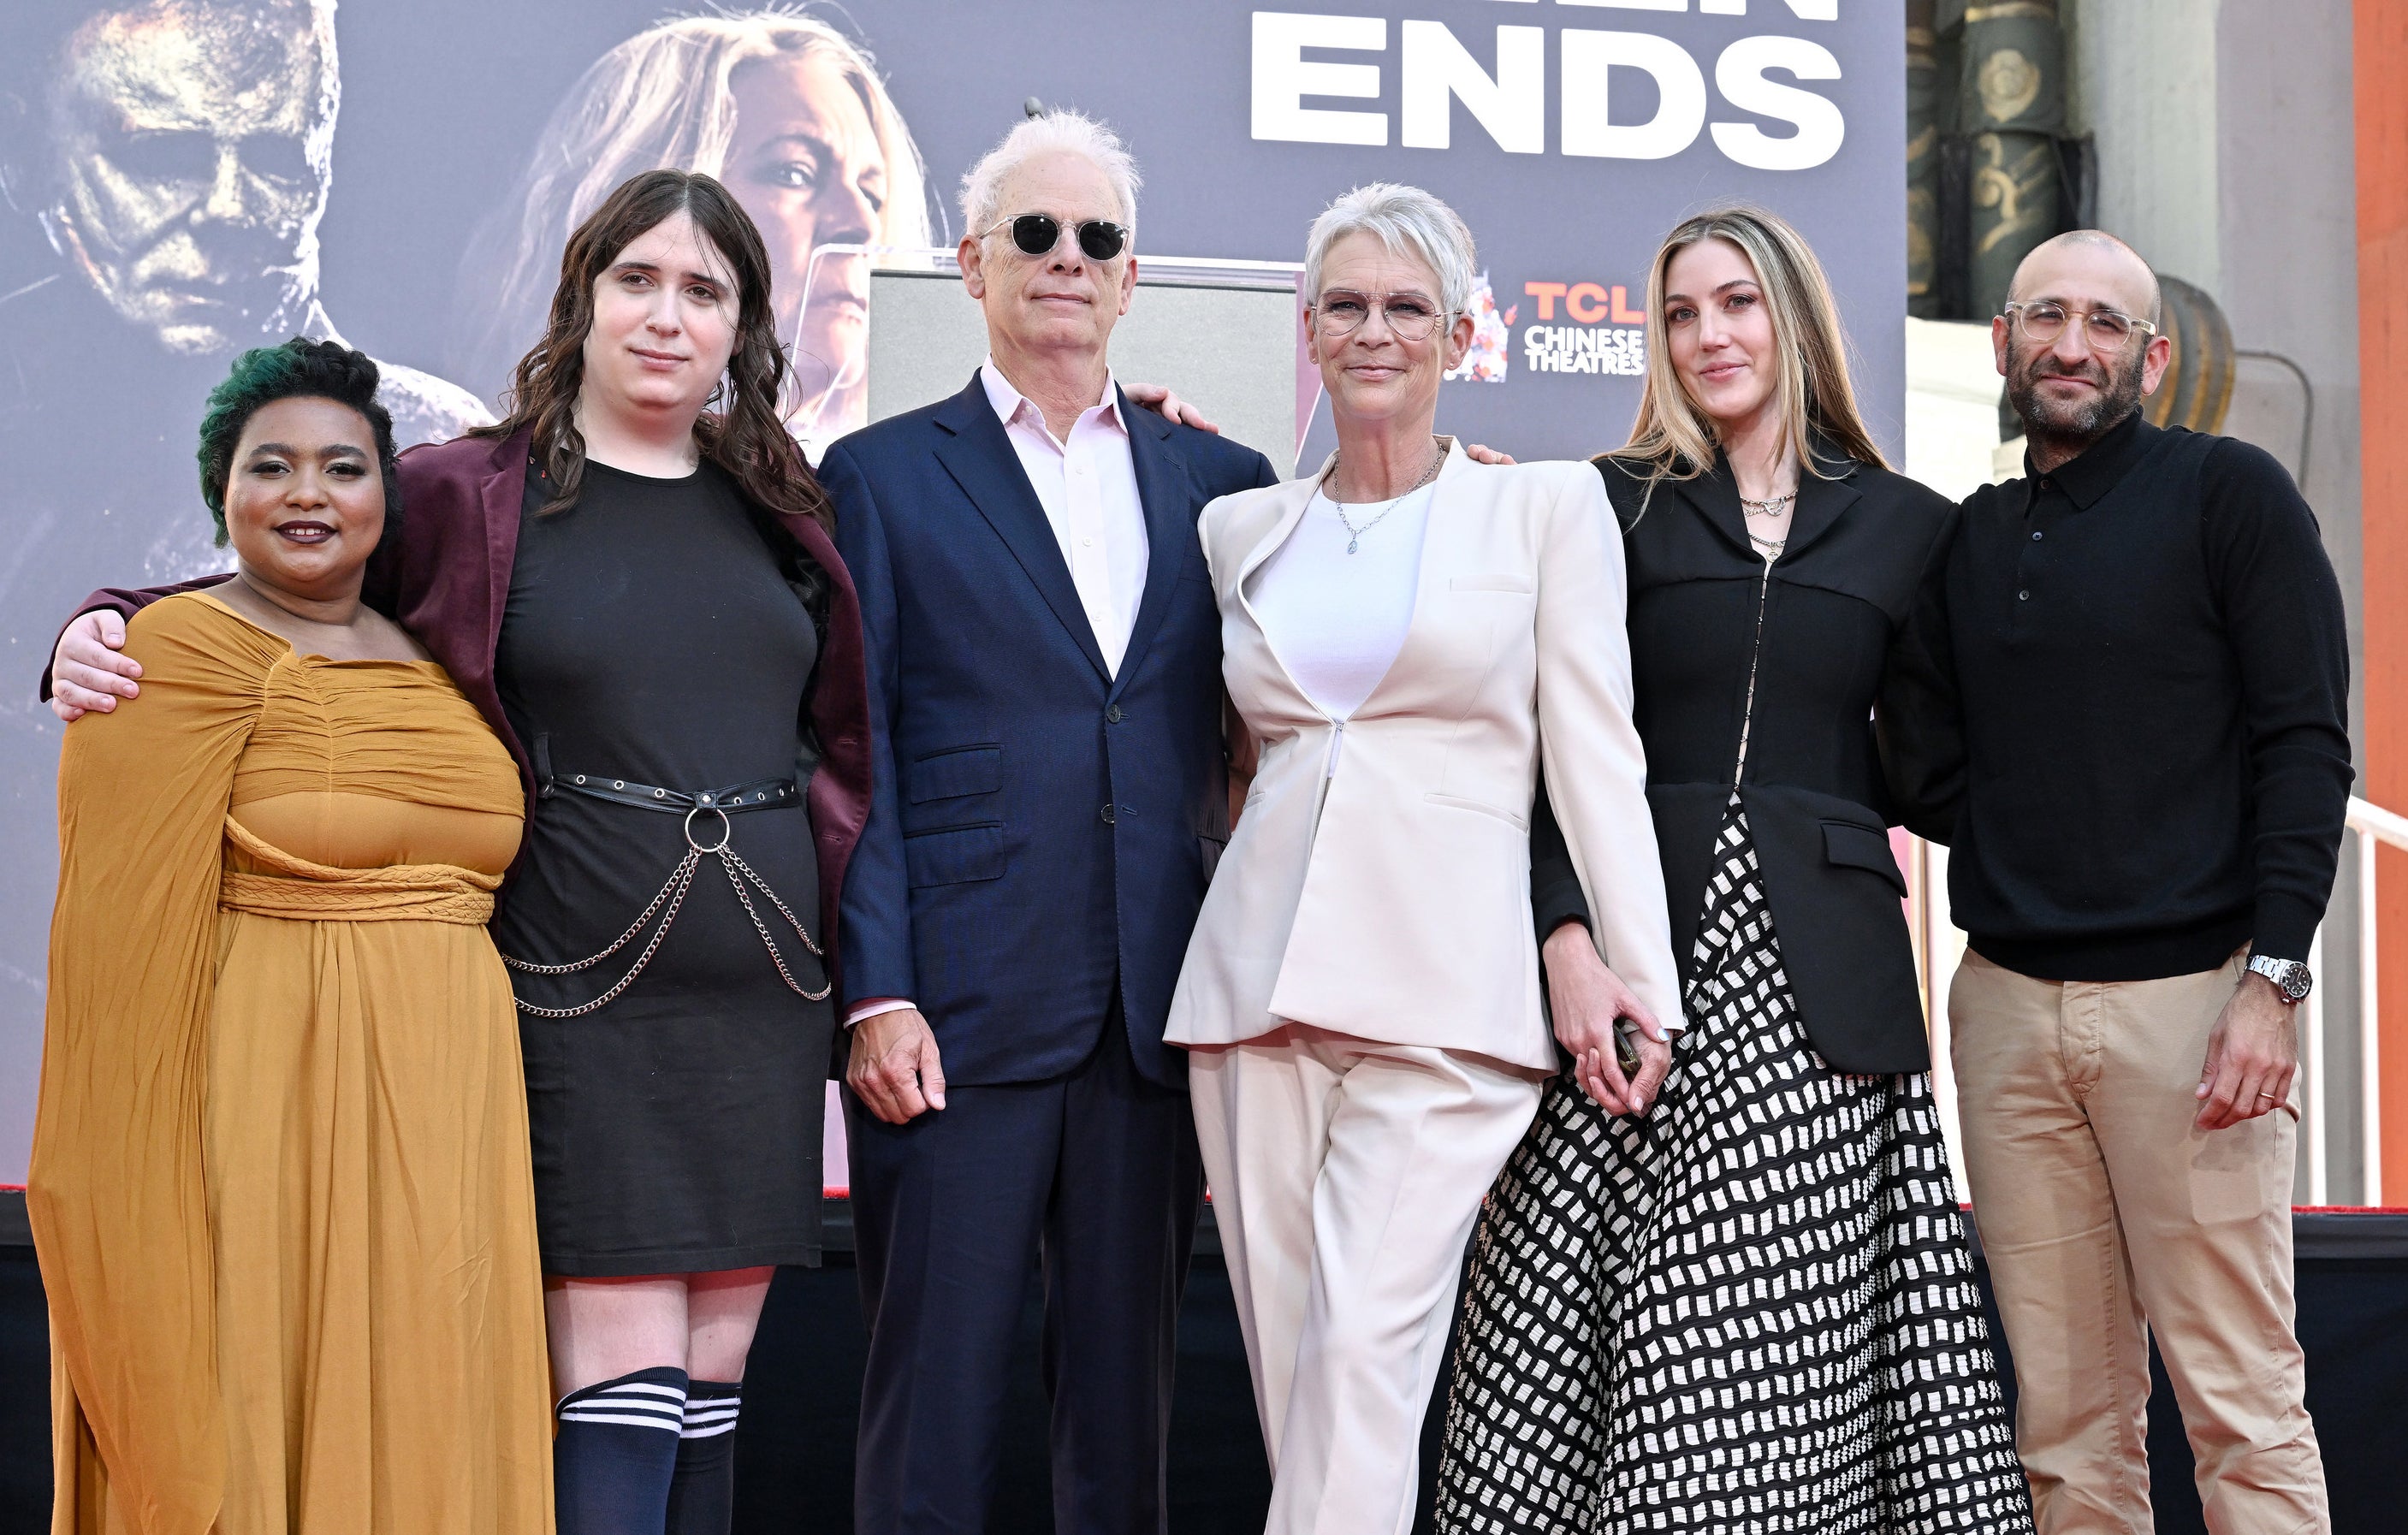 Jamie poses with her husband Christopher Guest, Ruby, her wife, and Annie